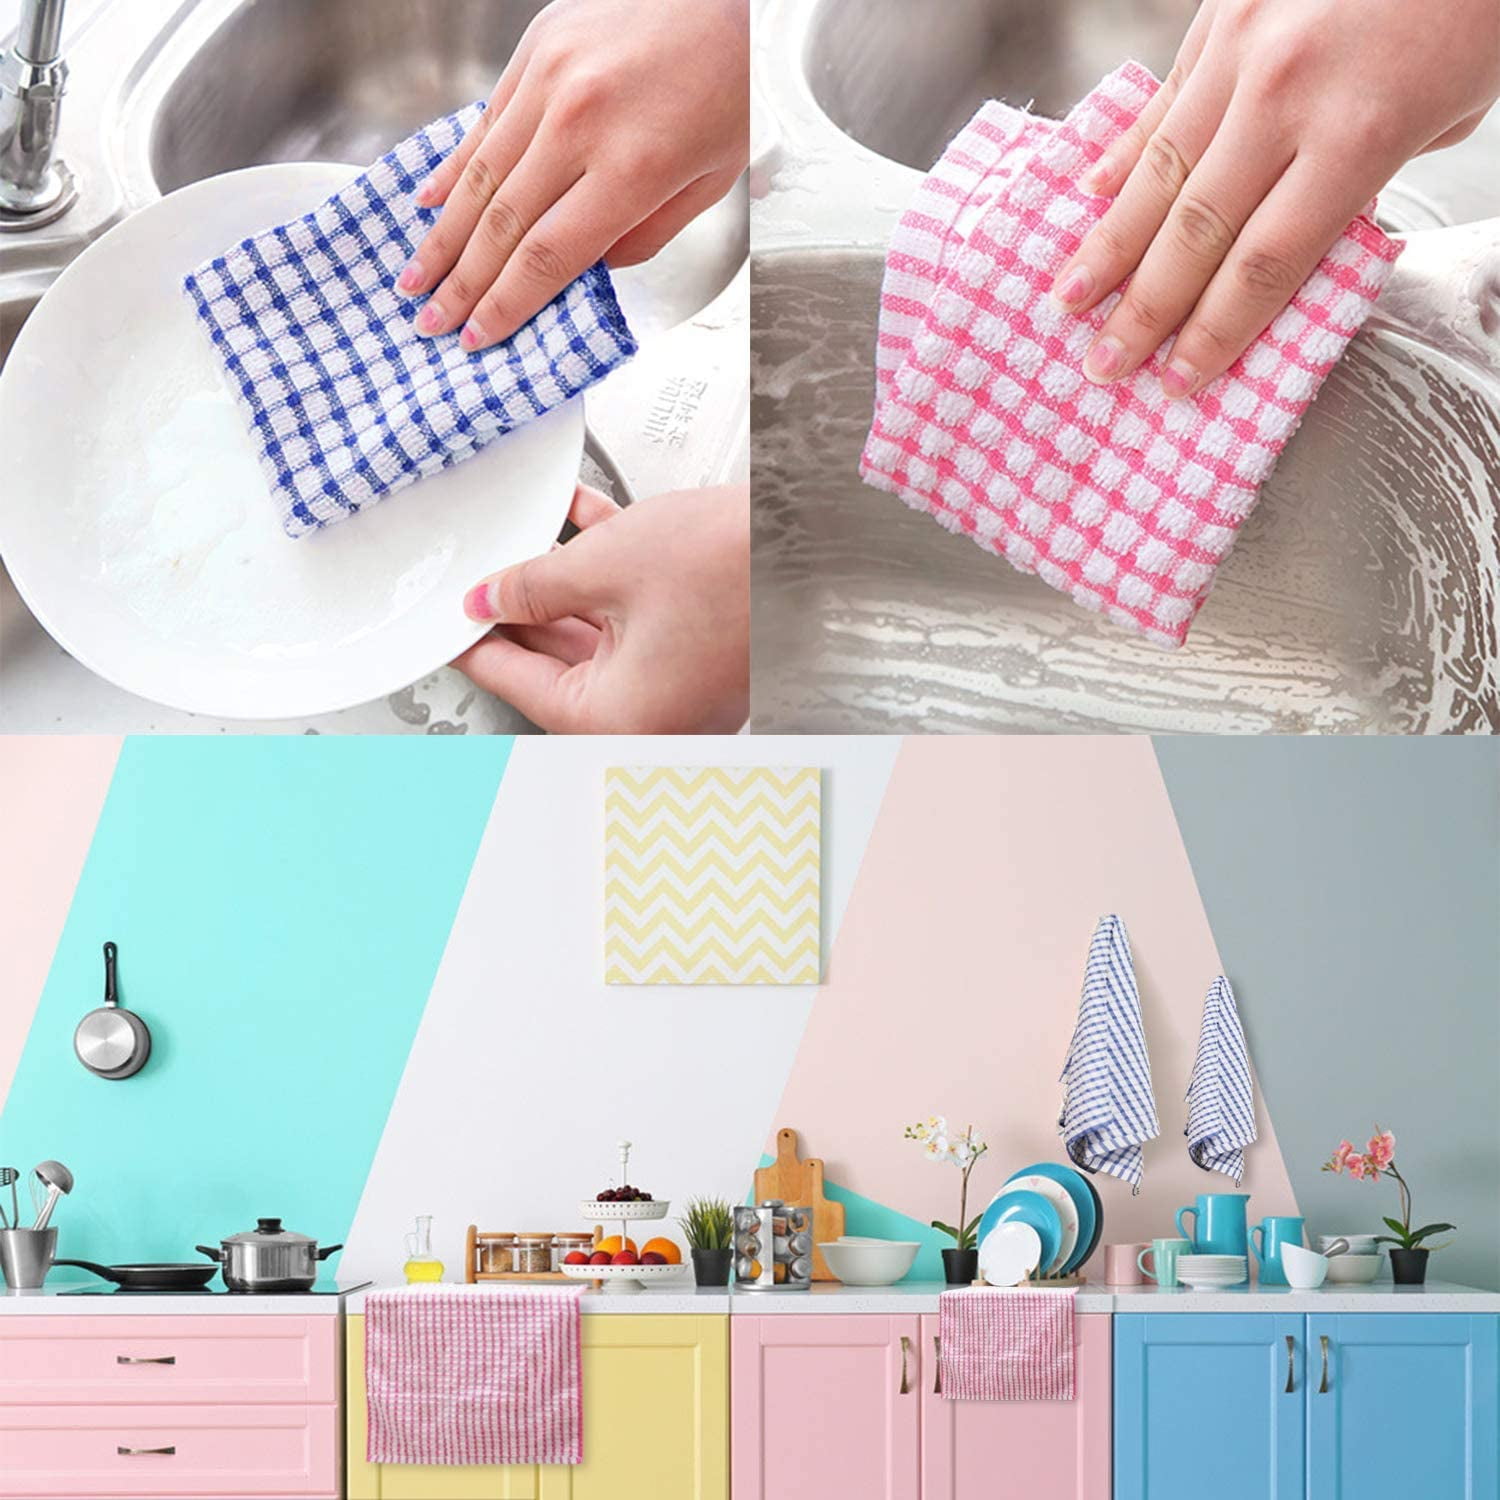 AOTBAT Kitchen Towels and Dishcloths Set, 16 x 25 12 12, Set of Bulk Cotton  Dish for Washing Dishes Rags Everyday Cooking Baking